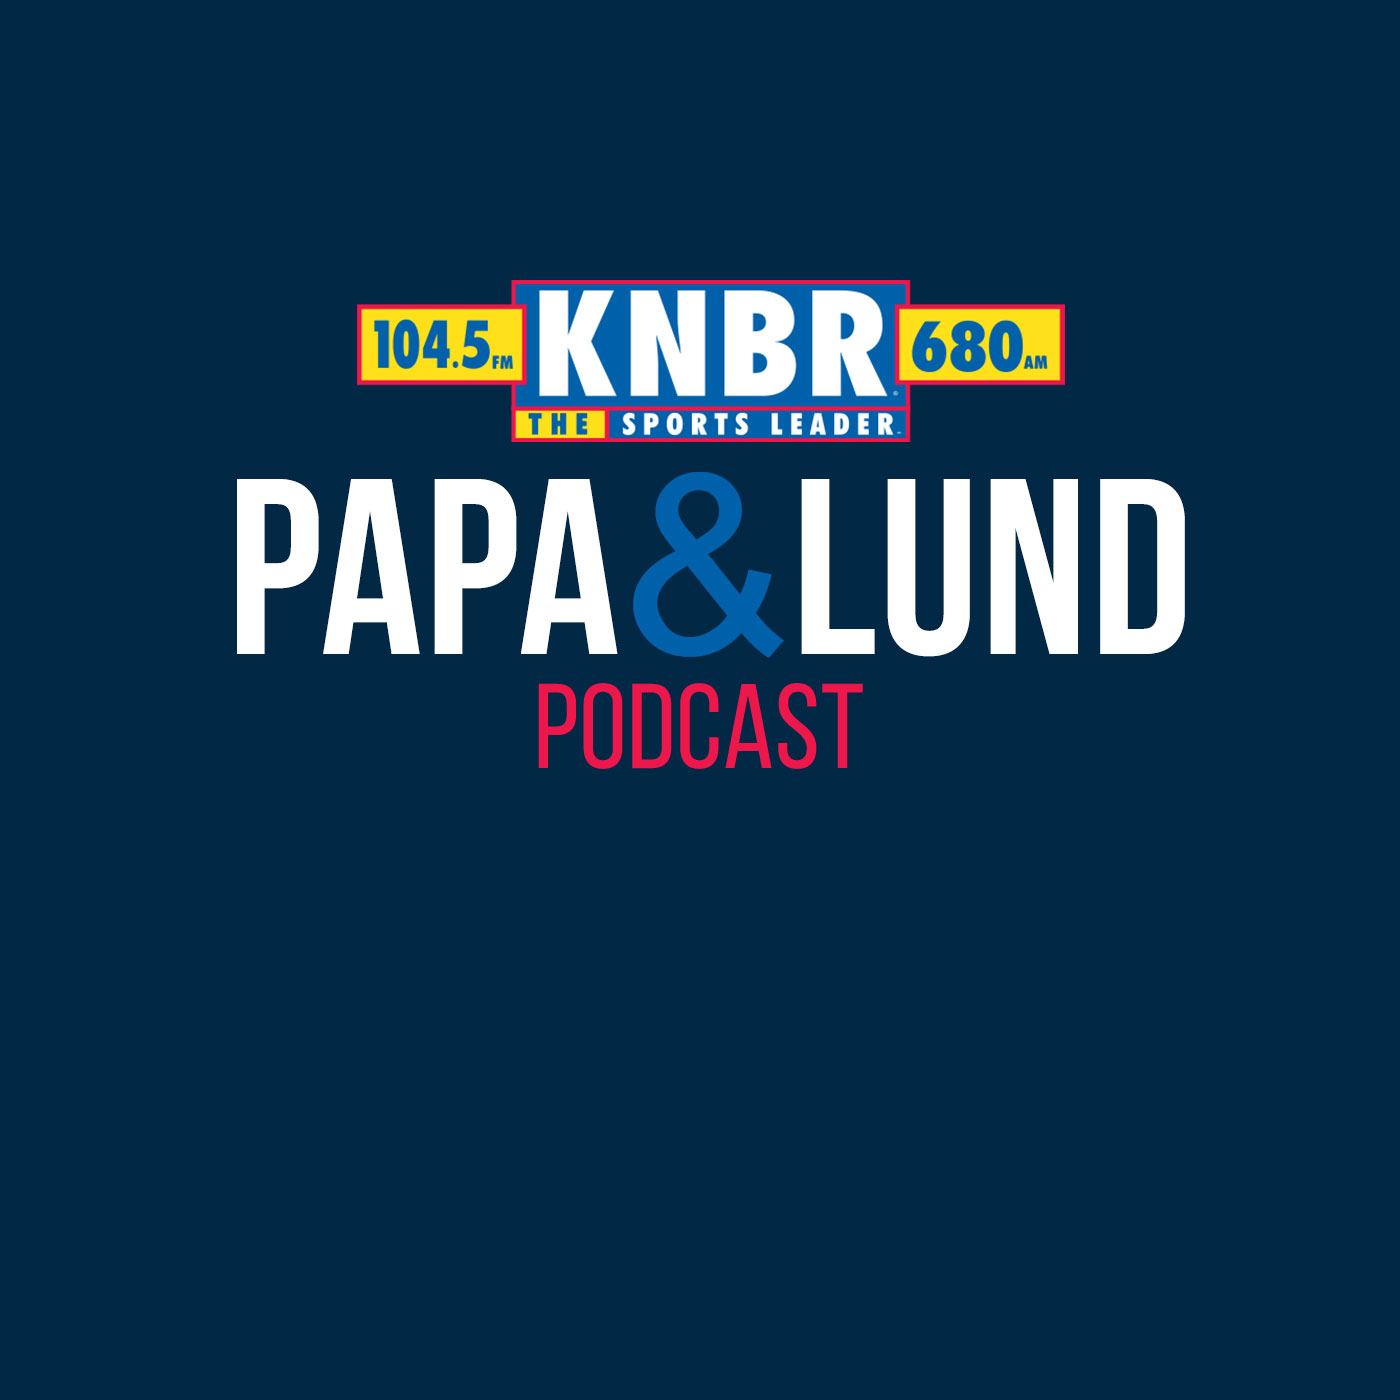 4-25 Logan Ryan joins Papa & Lund to discuss the Niners' secondary and the importance of resigning Brandon Aiyuk